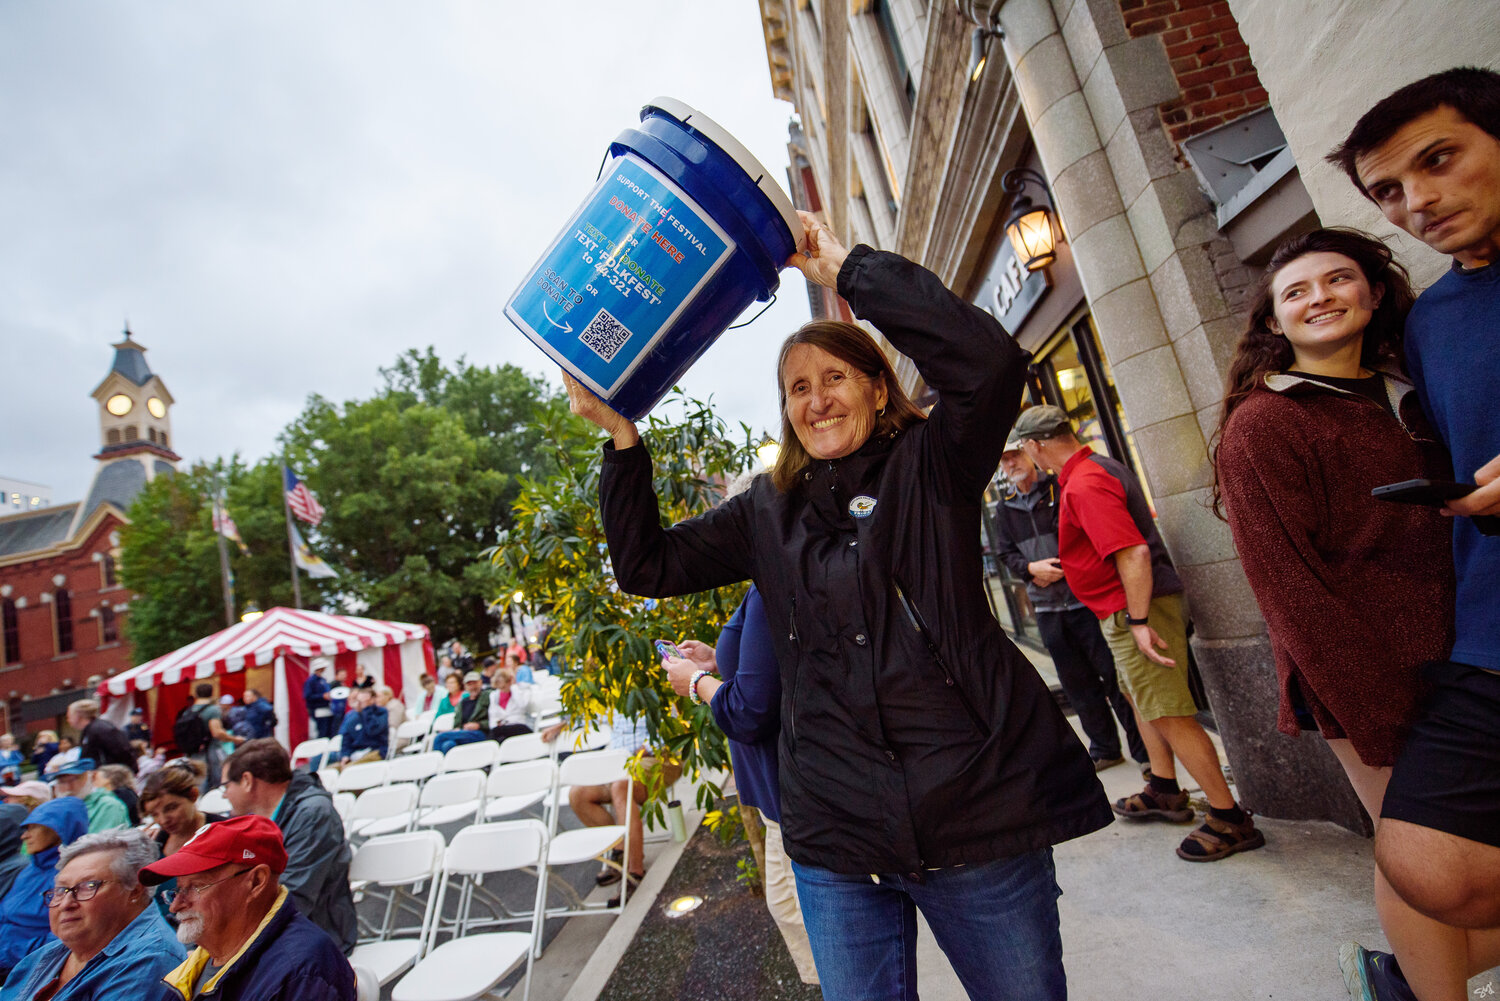 Volunteers on the Bucket Brigade were out collecting donations.